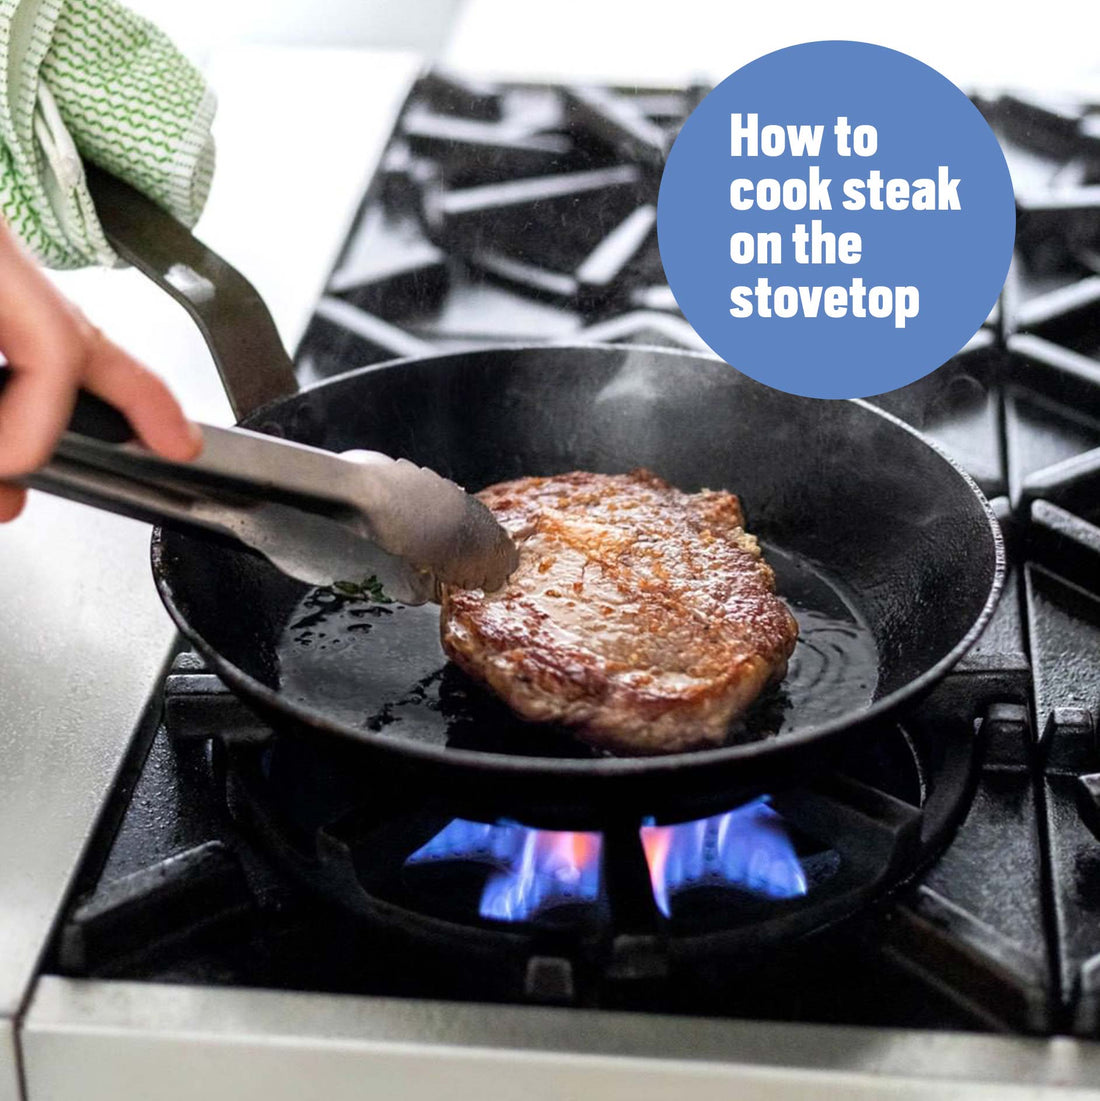 How to Cook Steak on the Stovetop